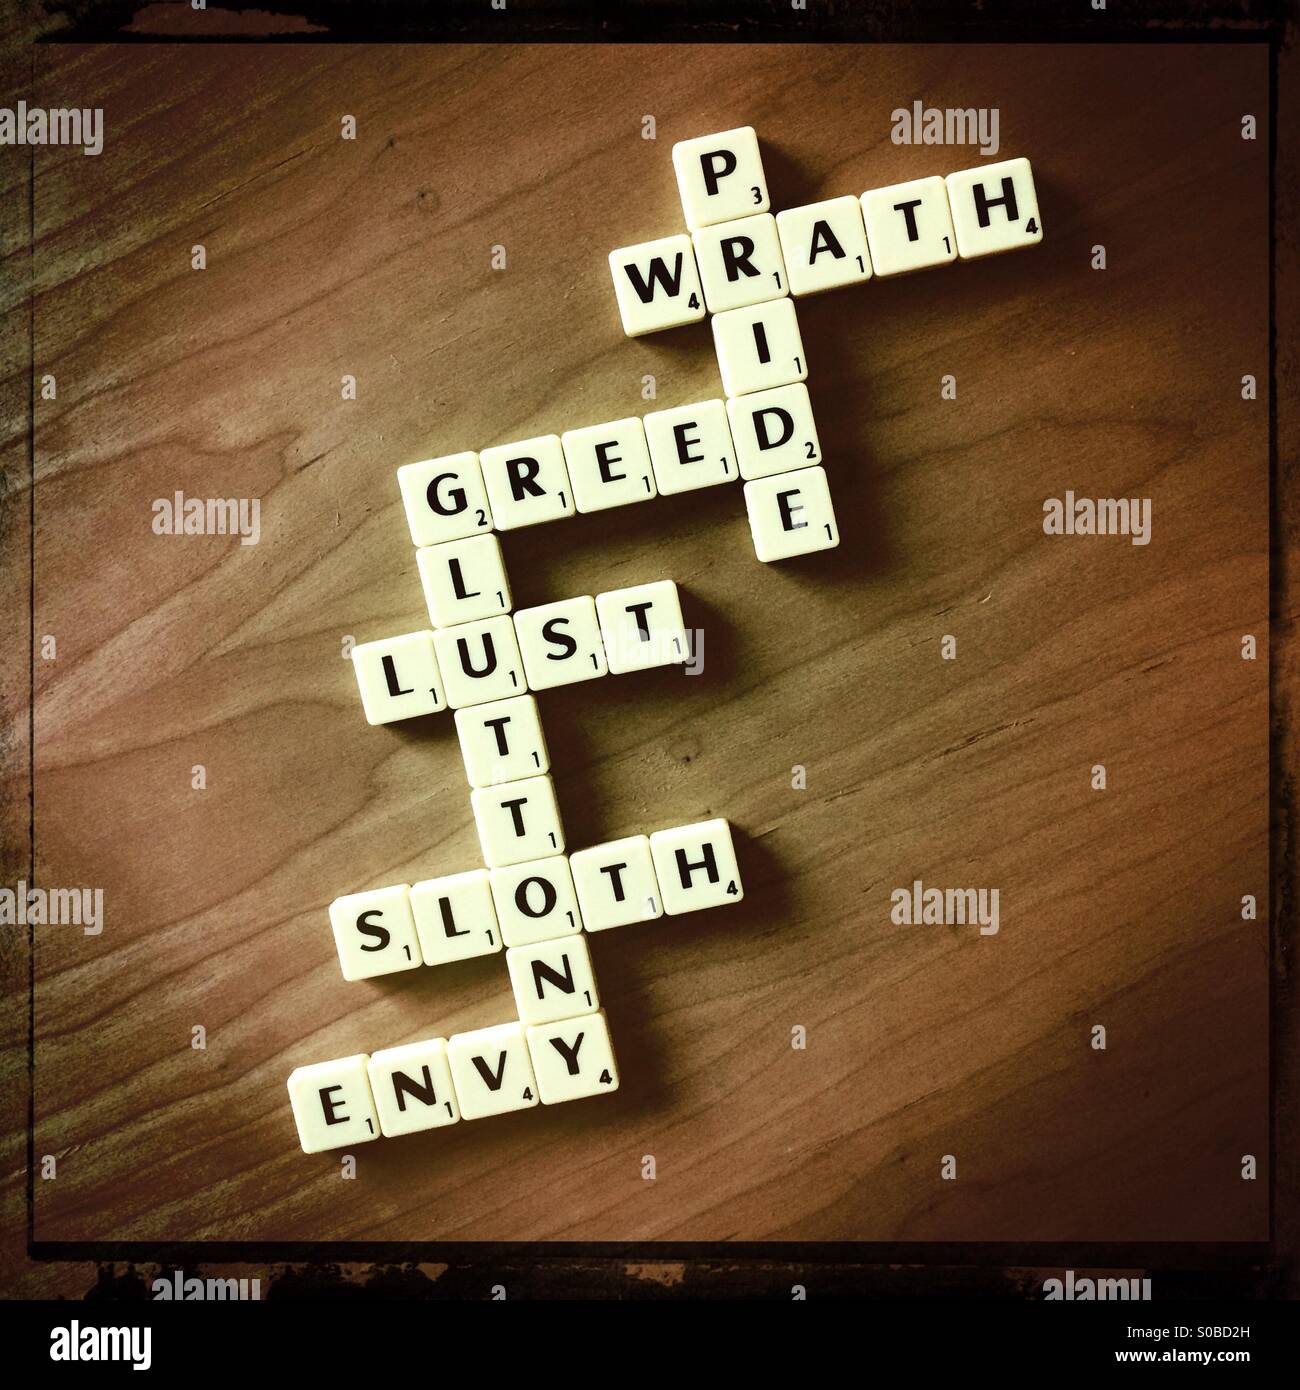 7 Deadly Sins spelled out in scrabble tiles Stock Photo